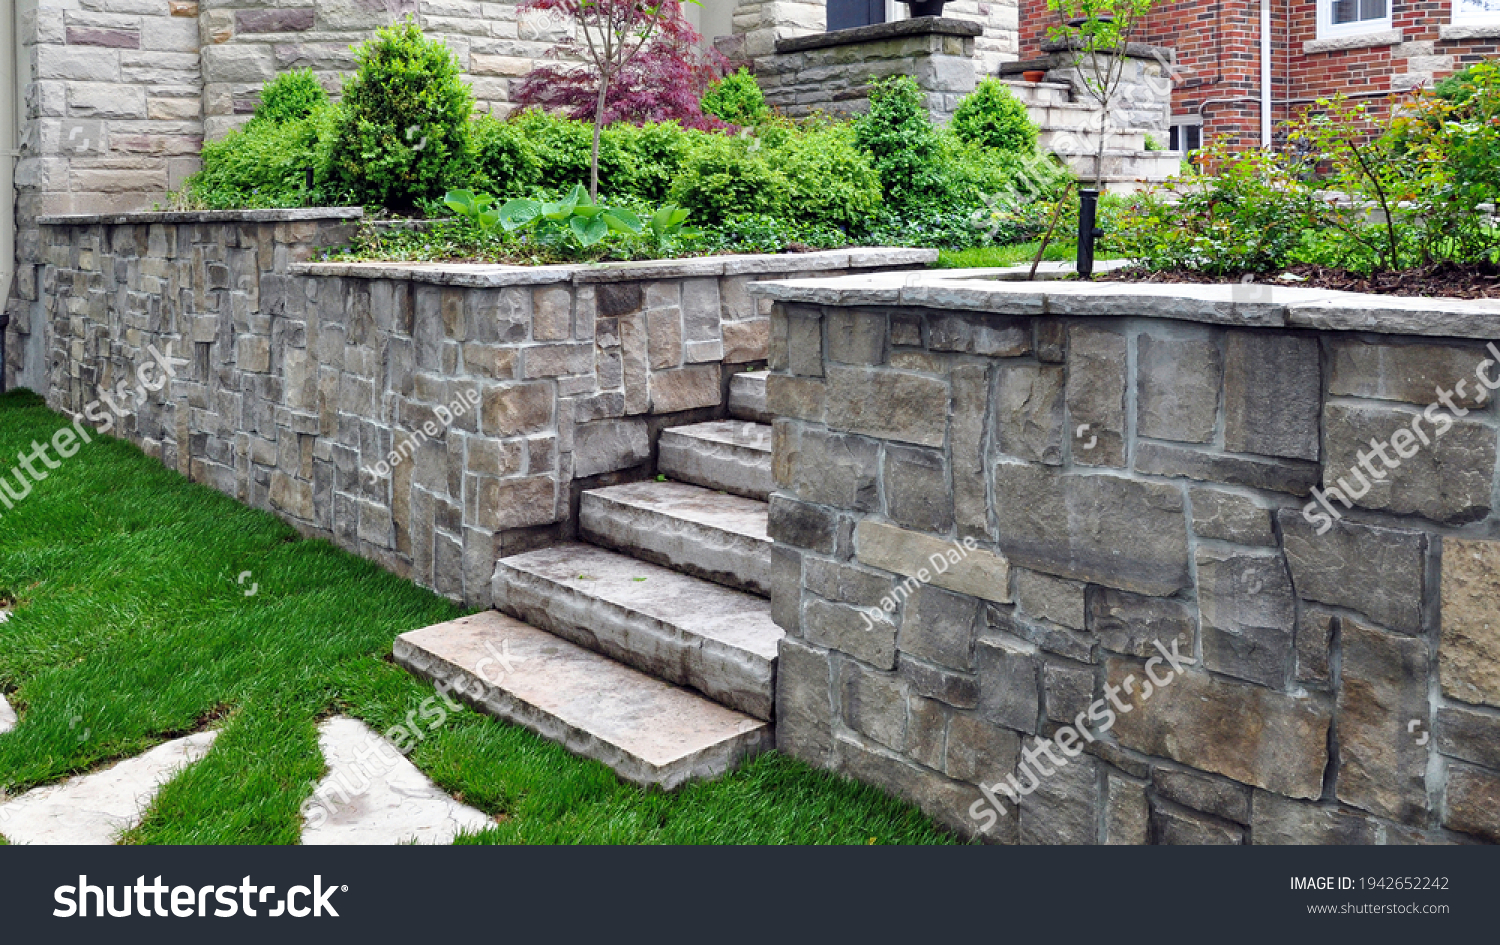 Natural stone steps and retaining wall in the garden. #1942652242